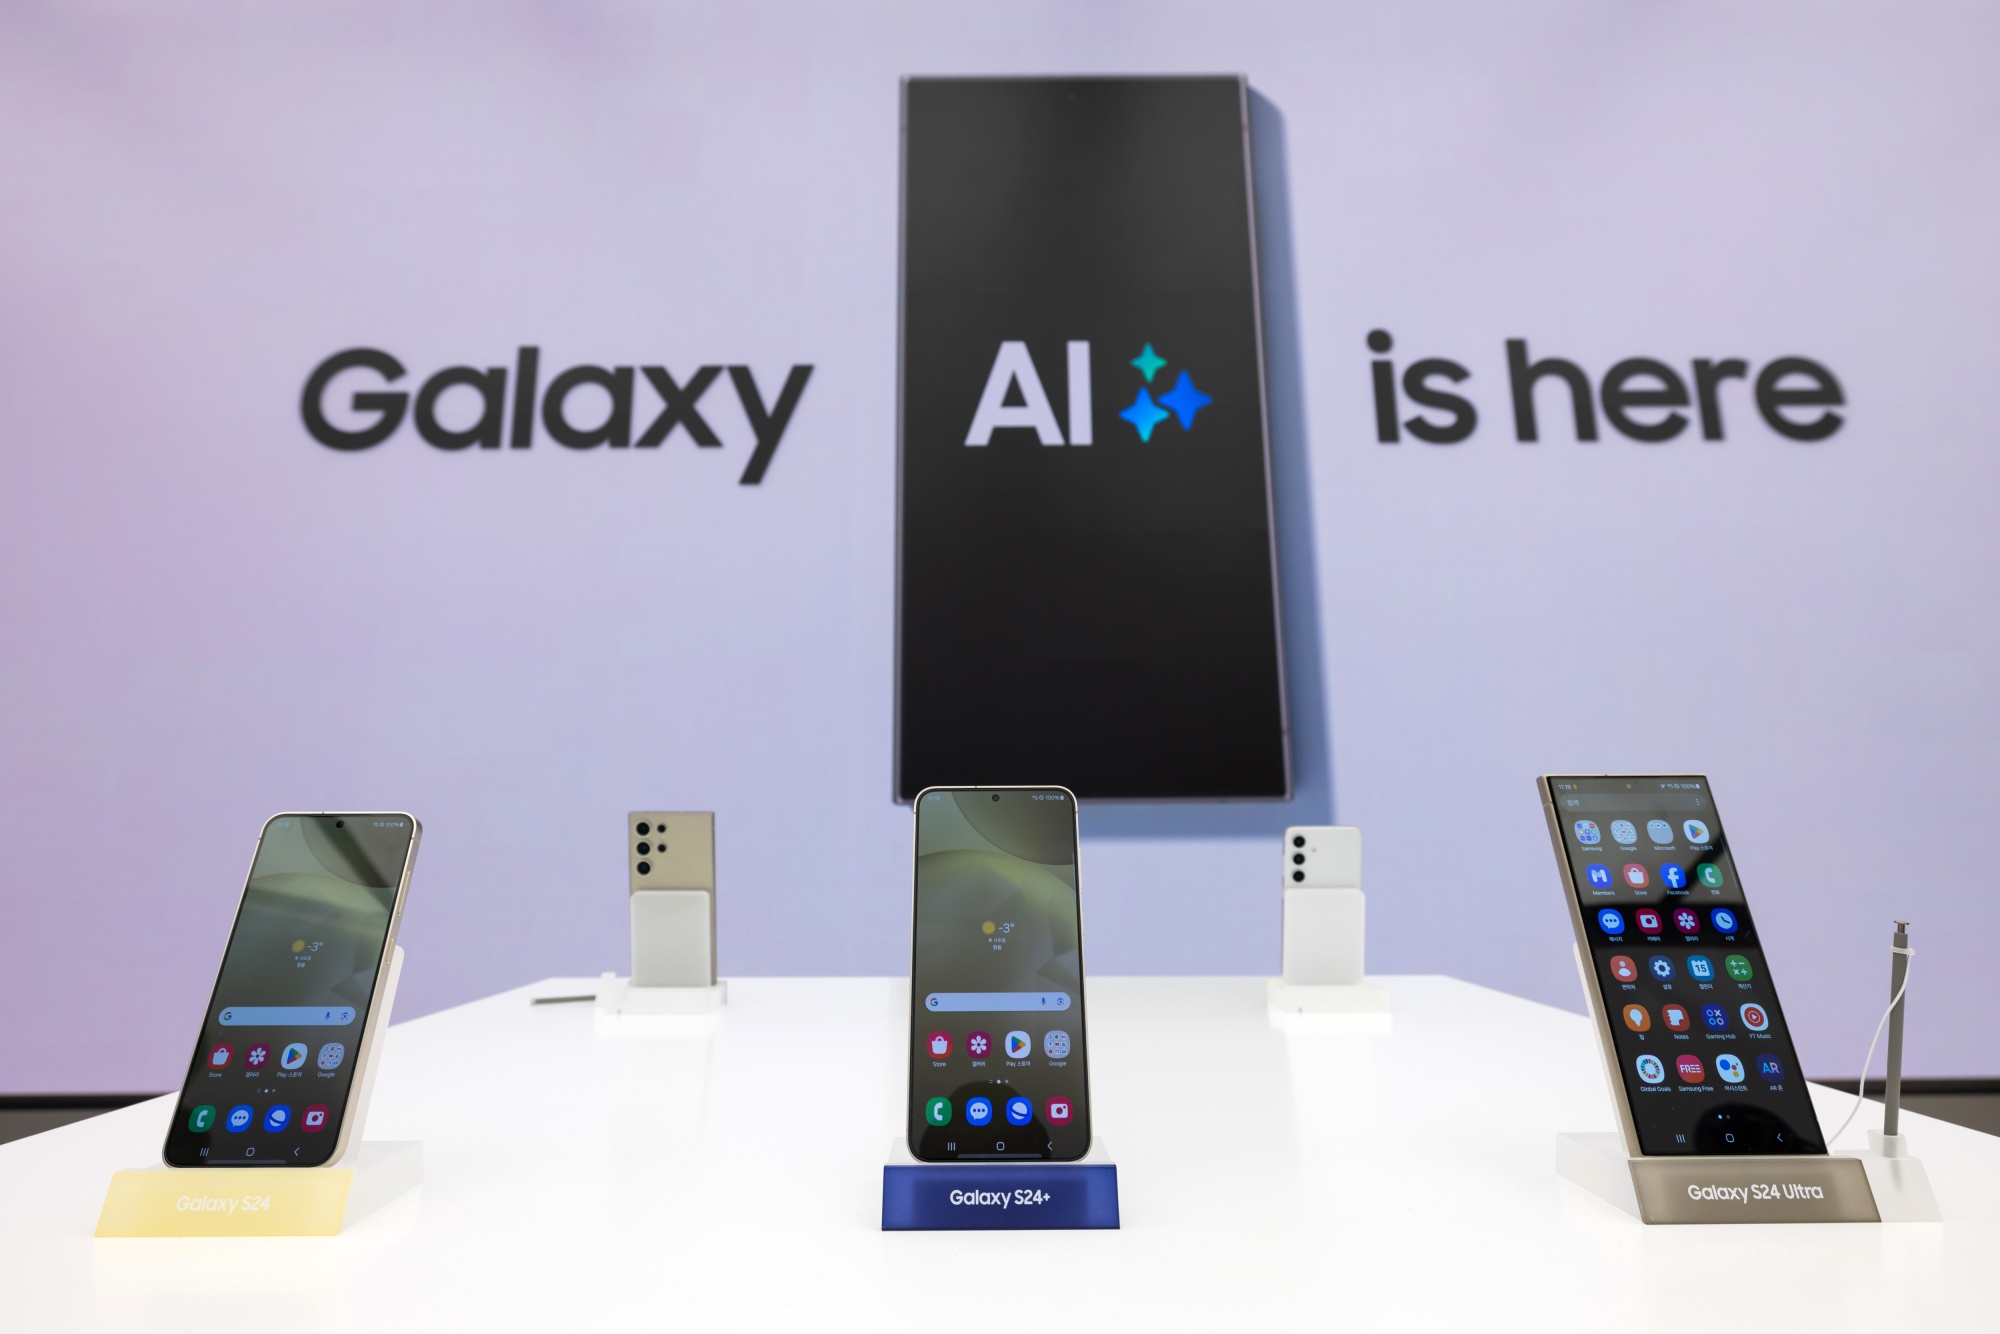 Samsung Bets on Google AI With Latest Galaxy S24 Phone - Bloomberg